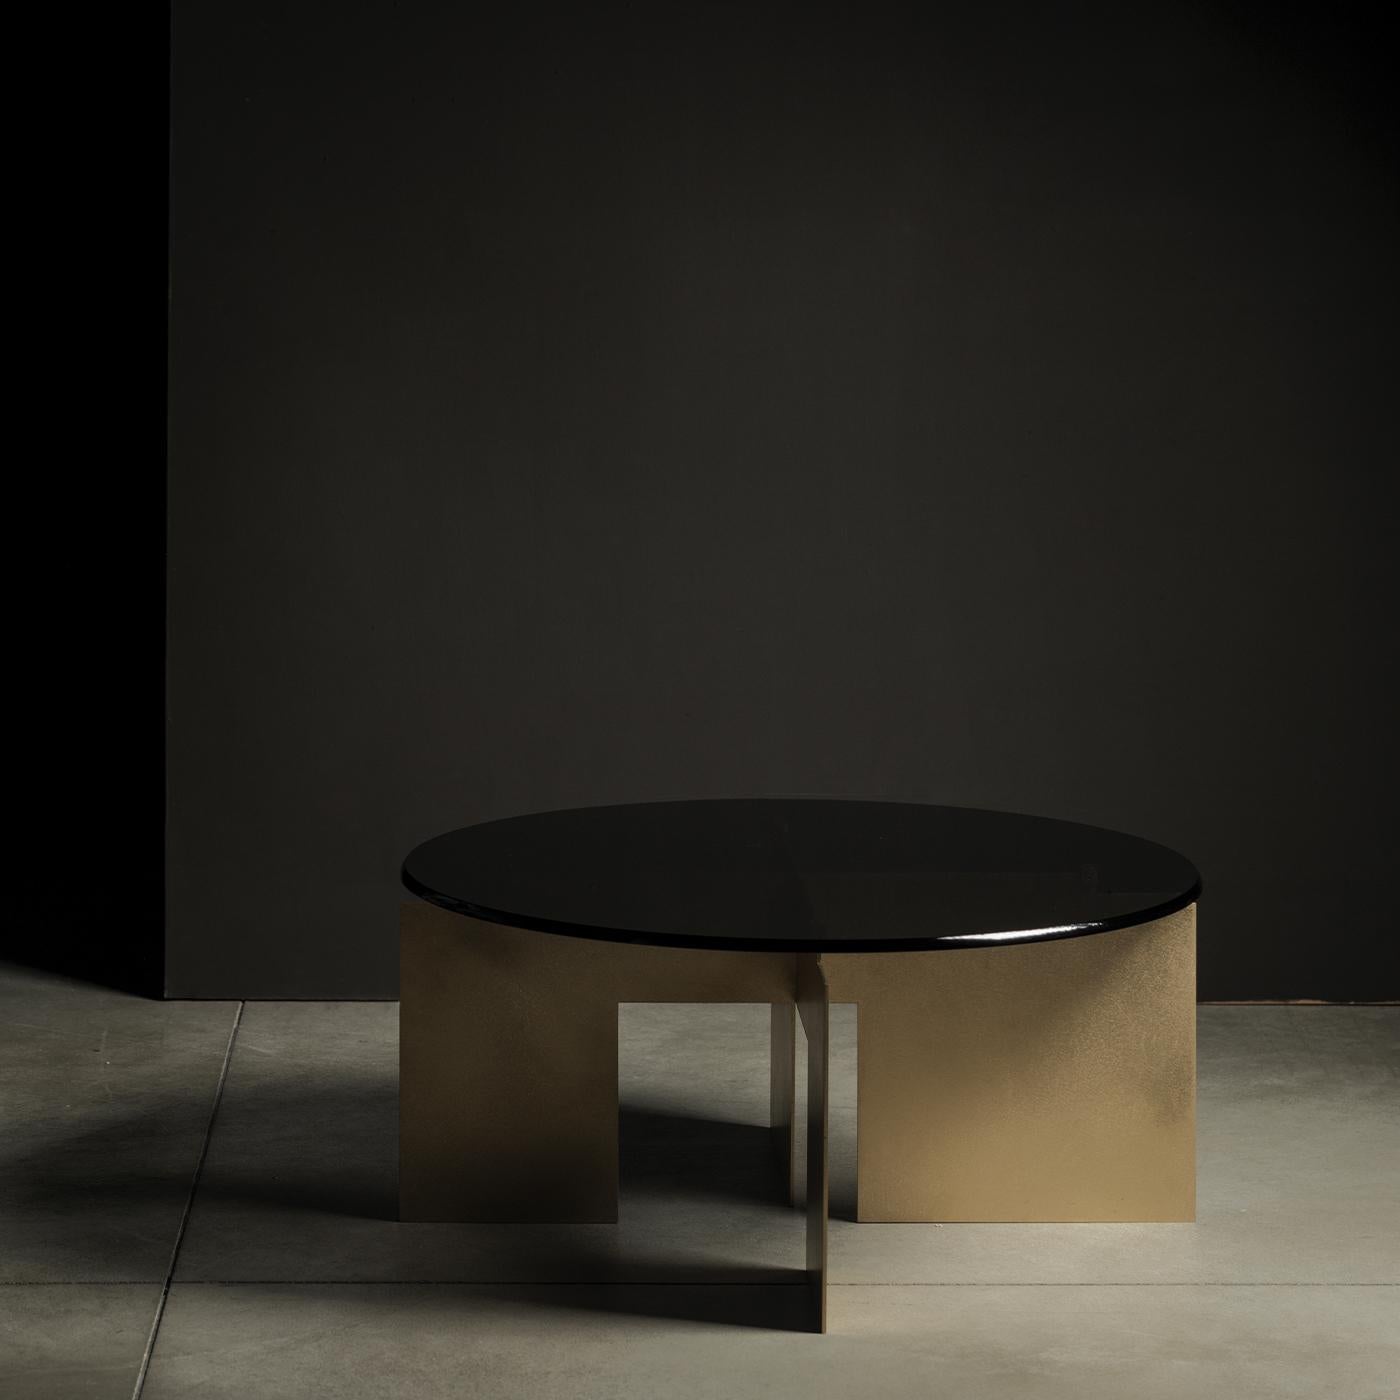 This striking coffee table features a brushed brass base that stands in contrast to its tinted, tempered glass top, creating a minimalist, essential style that is also highly original and unique. Designed by Filippo Montaino for the Chelini Firenze